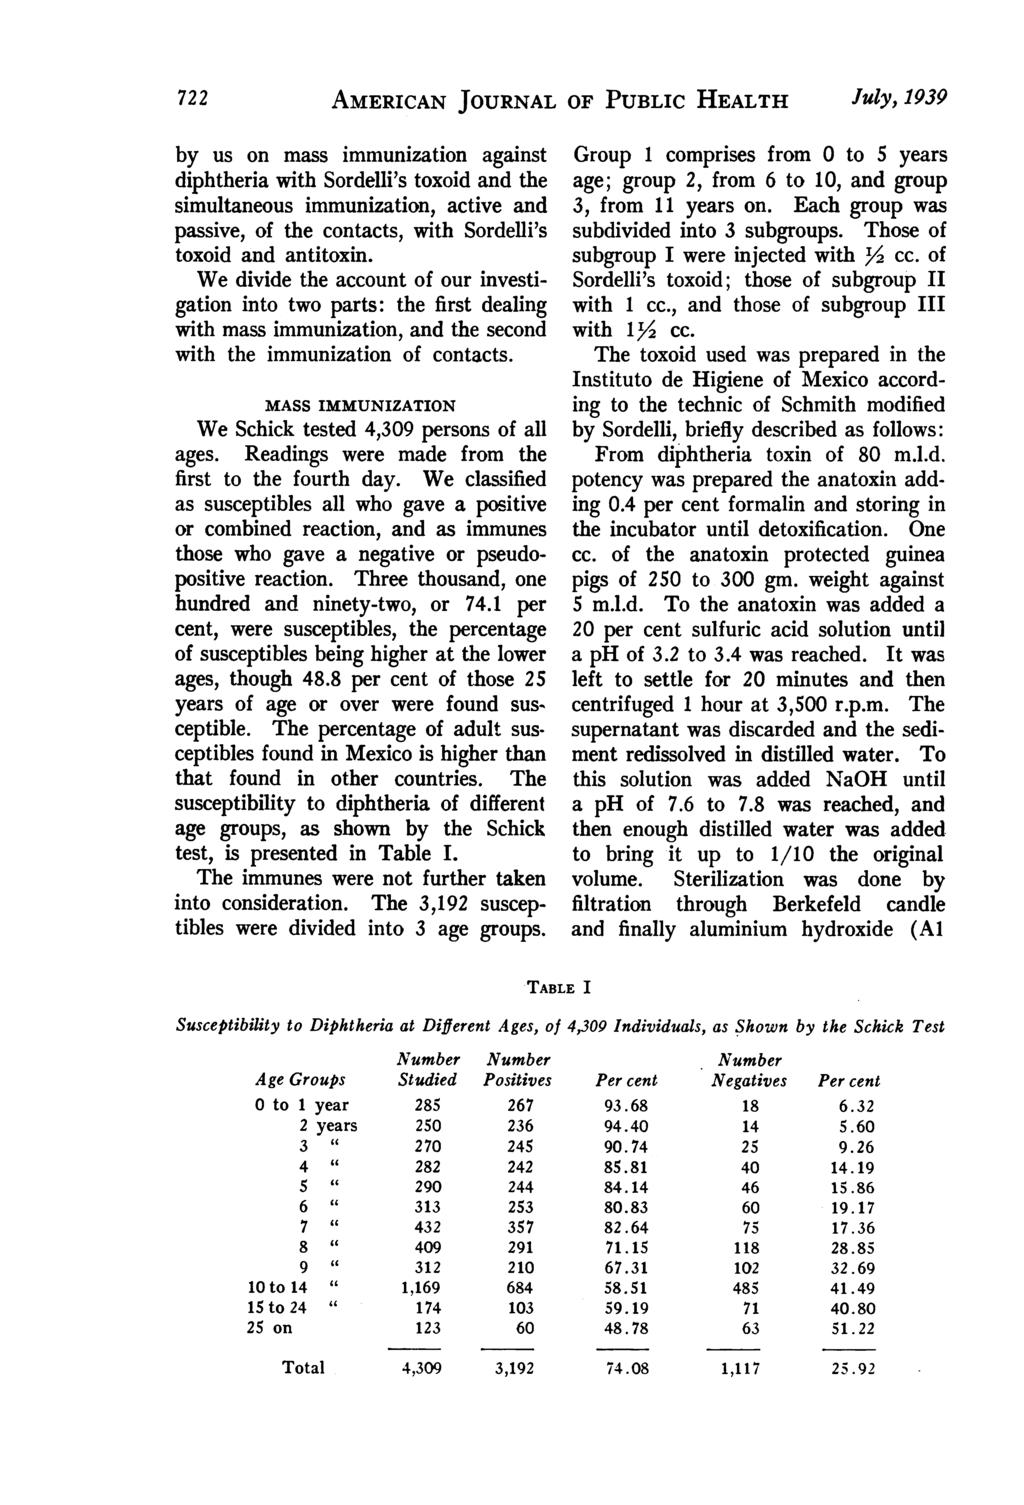 7 AMERICAN JOURNAL OF PUBLIC HEALTH by us on mass immunization against diphtheria with Sordelli's toxoid and the simultaneous immunization, active and passive, of the contacts, with Sordelli's toxoid